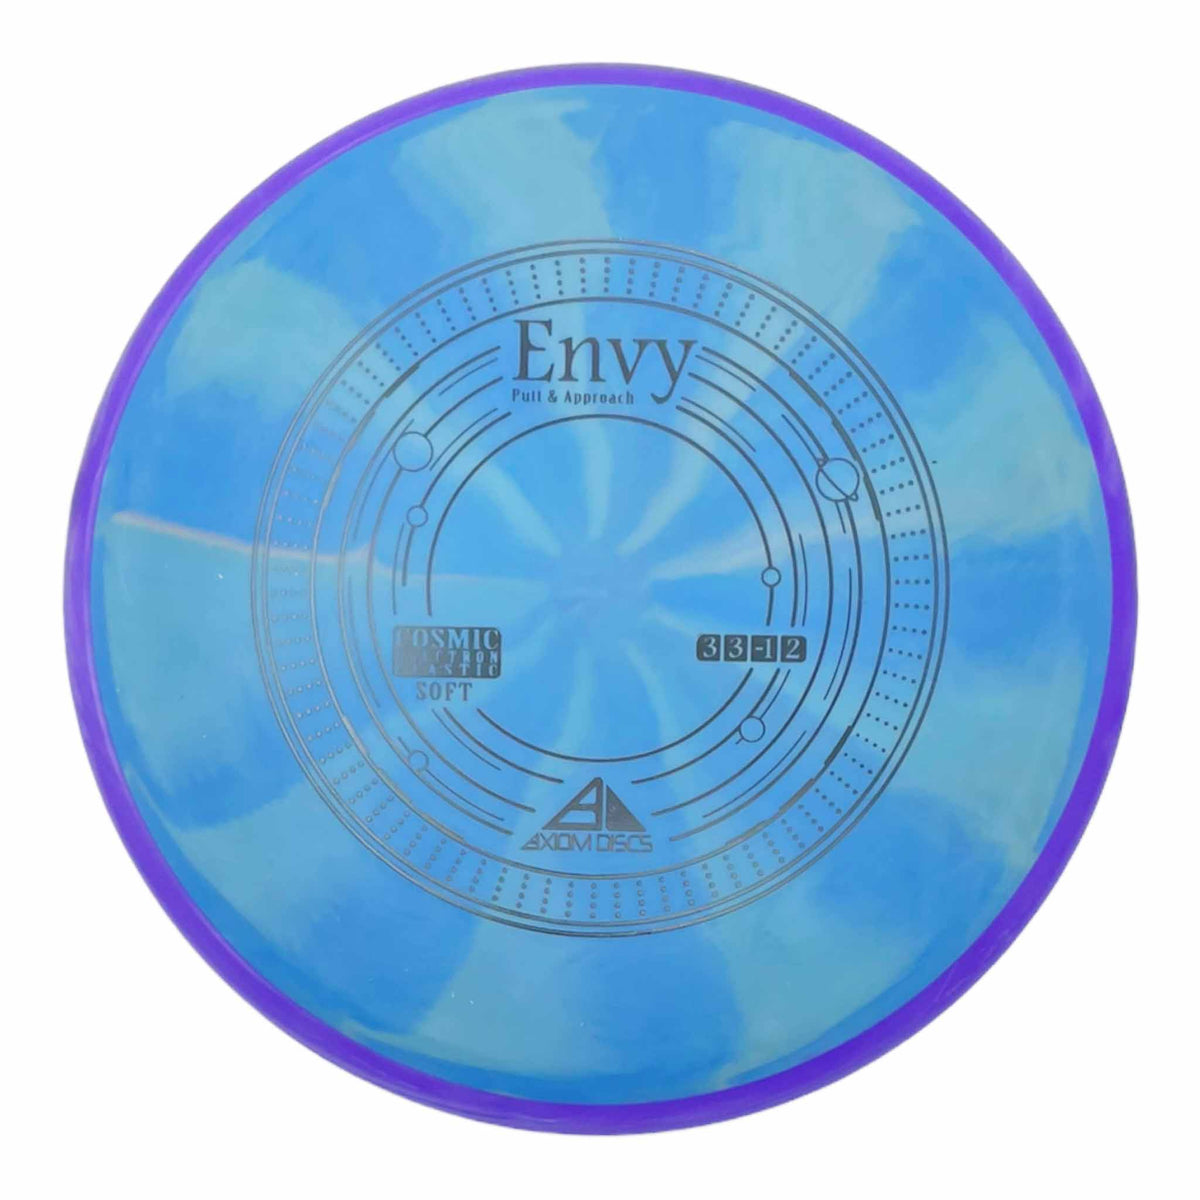 Axiom Discs Cosmic Electron Soft Envy putter and approach - Blue / Purple